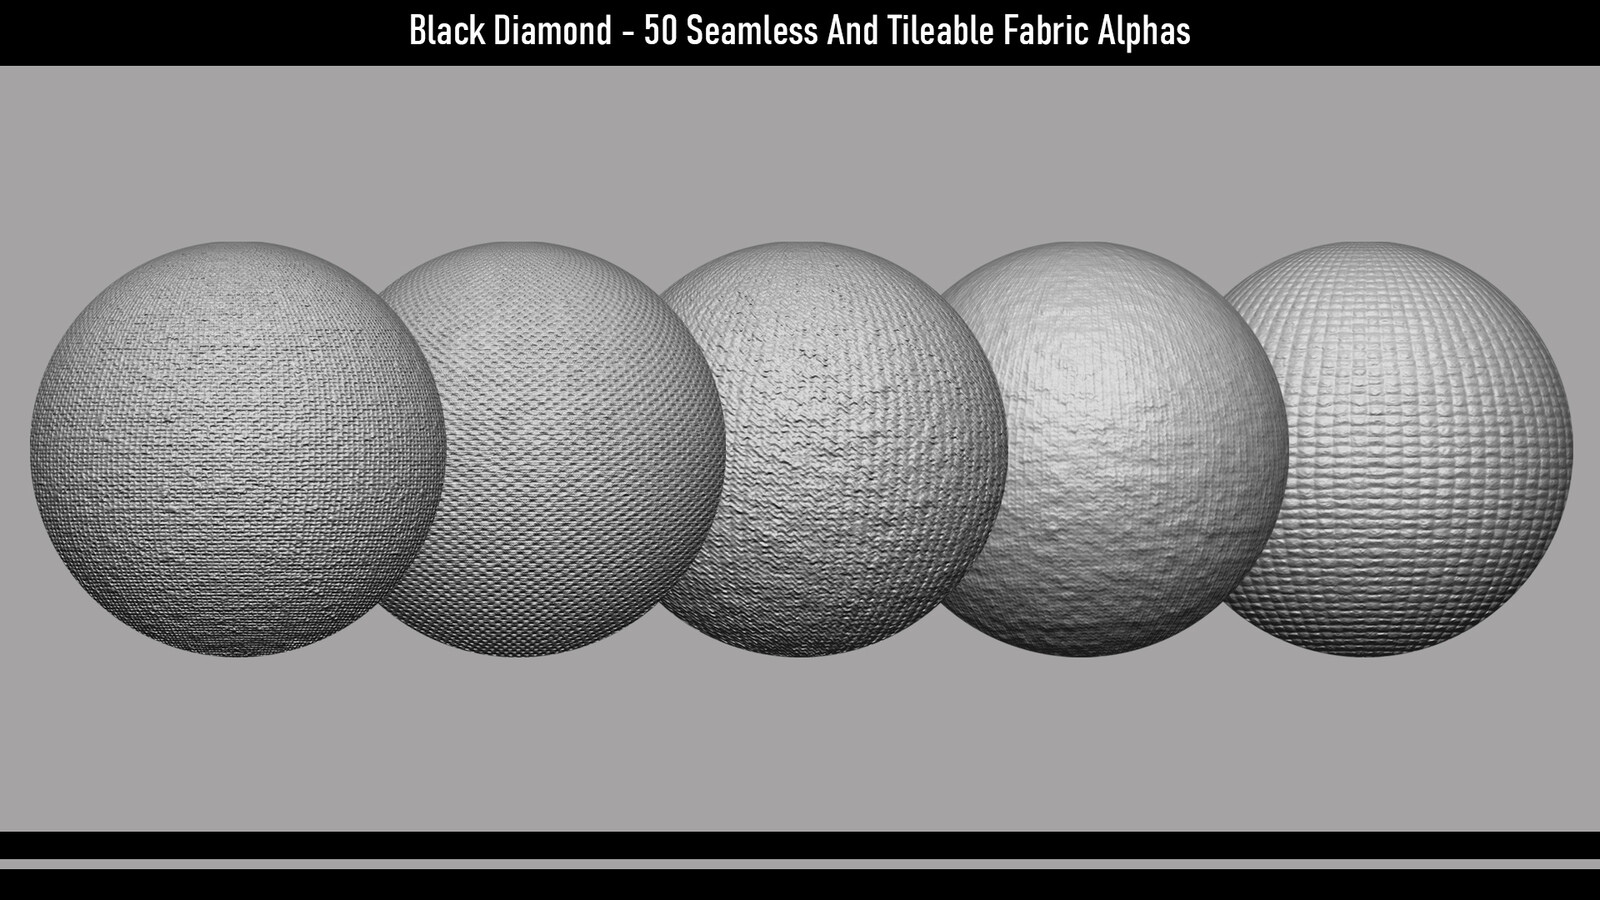 Black Diamond Store - 50 Seamless And Tileable Fabric Alphas